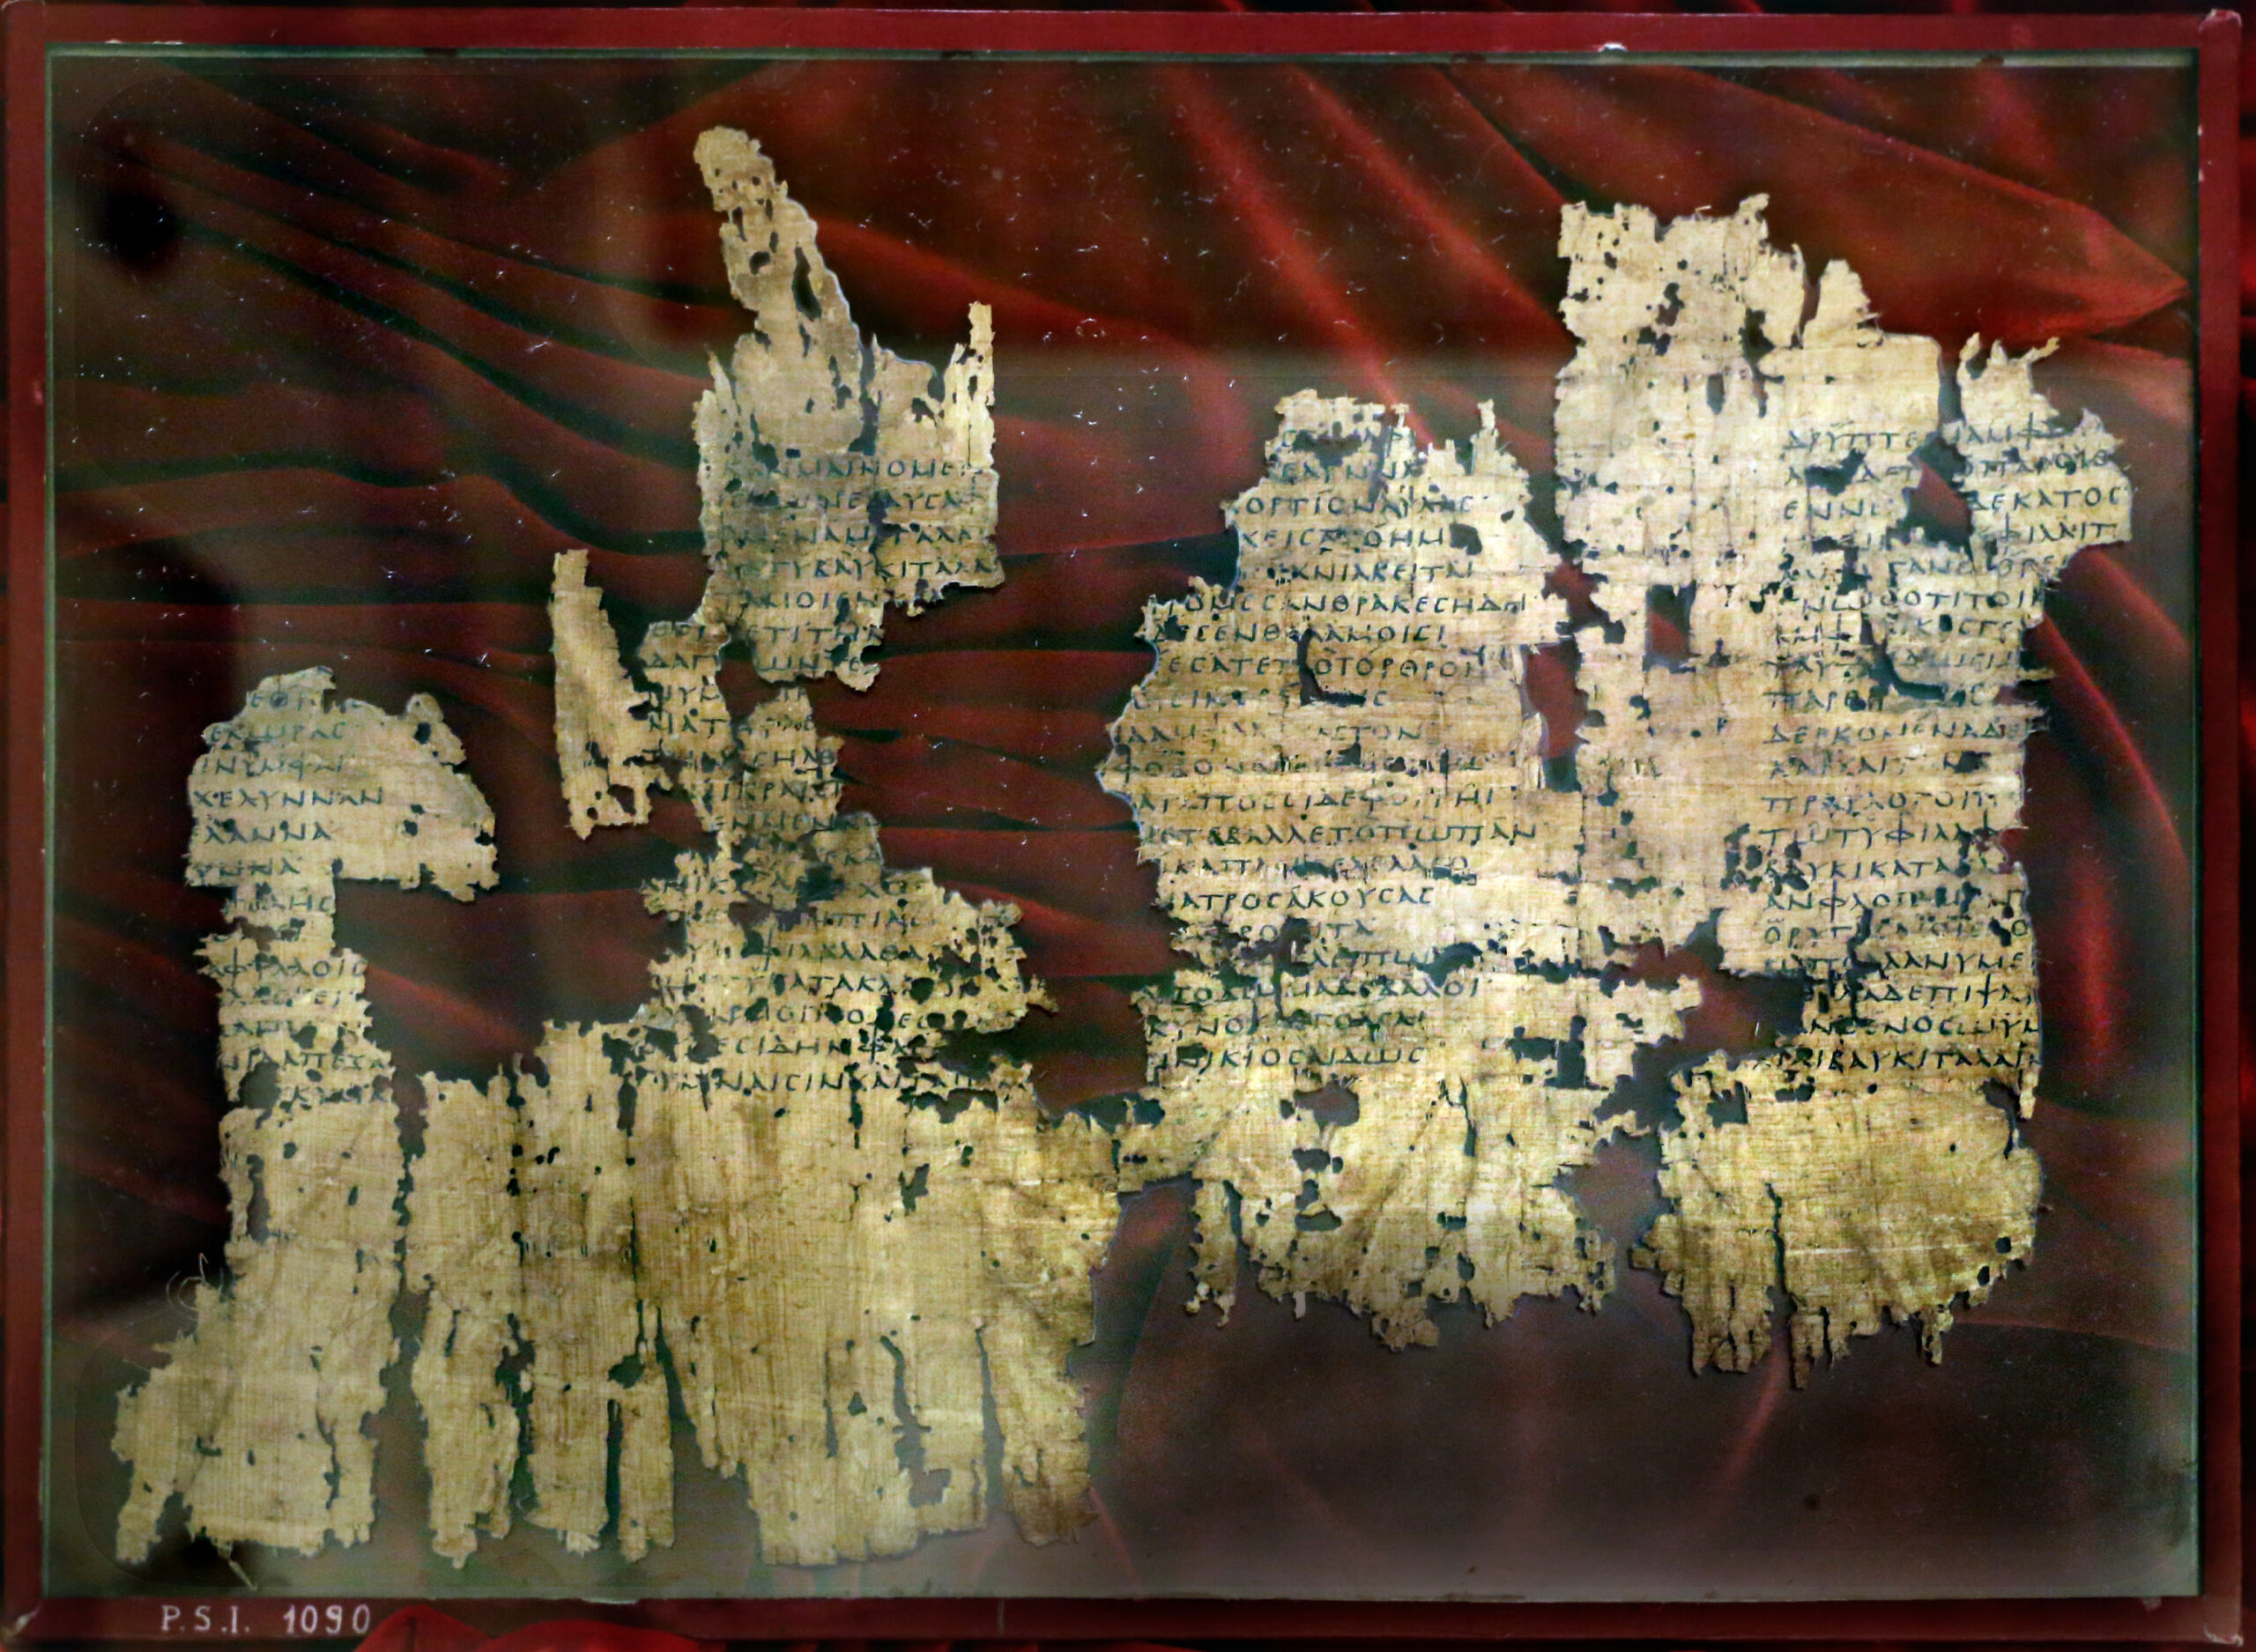 Fragments of Distaff by Erinna on a red fabric background.